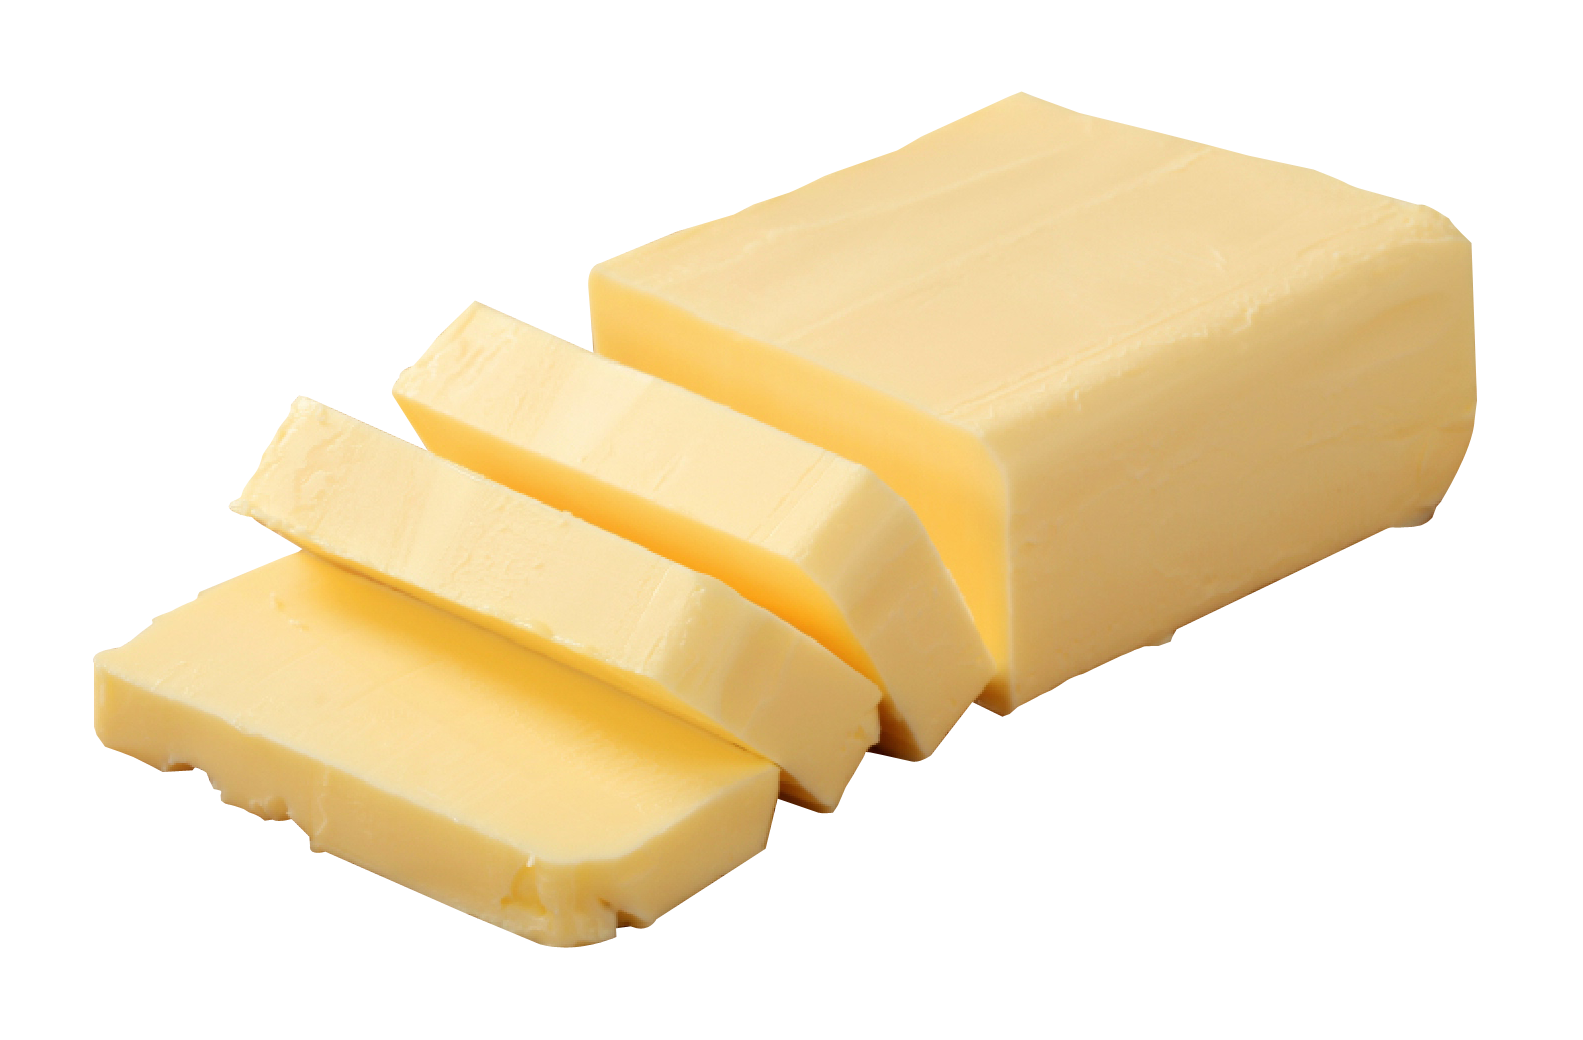 A Block Of Butter On A Black Background